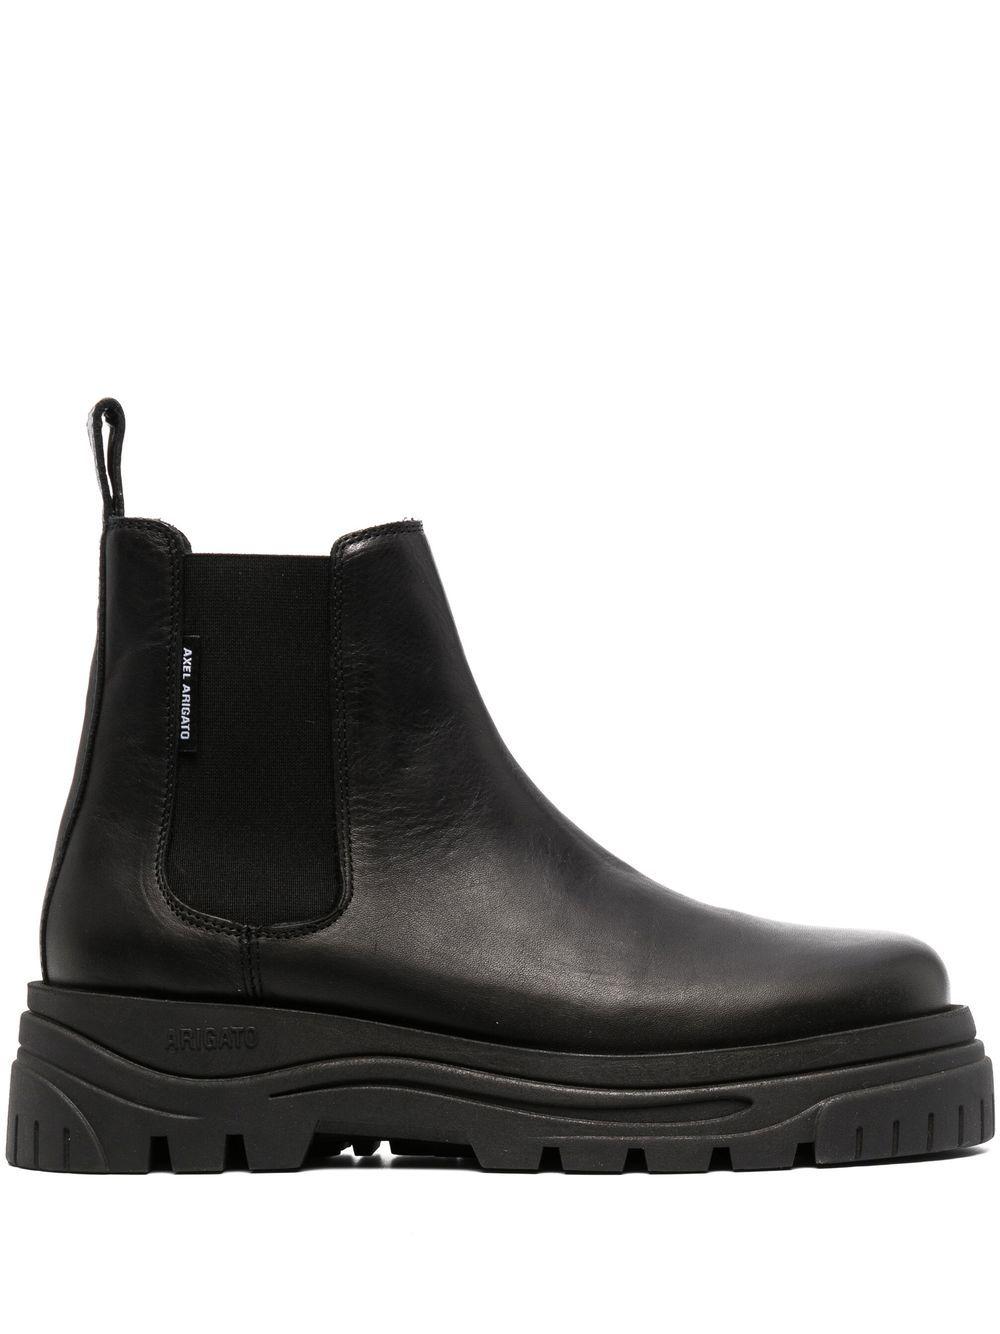 Axel Arigato Blyde Leather Chelsea Boots in Black for Men | Lyst